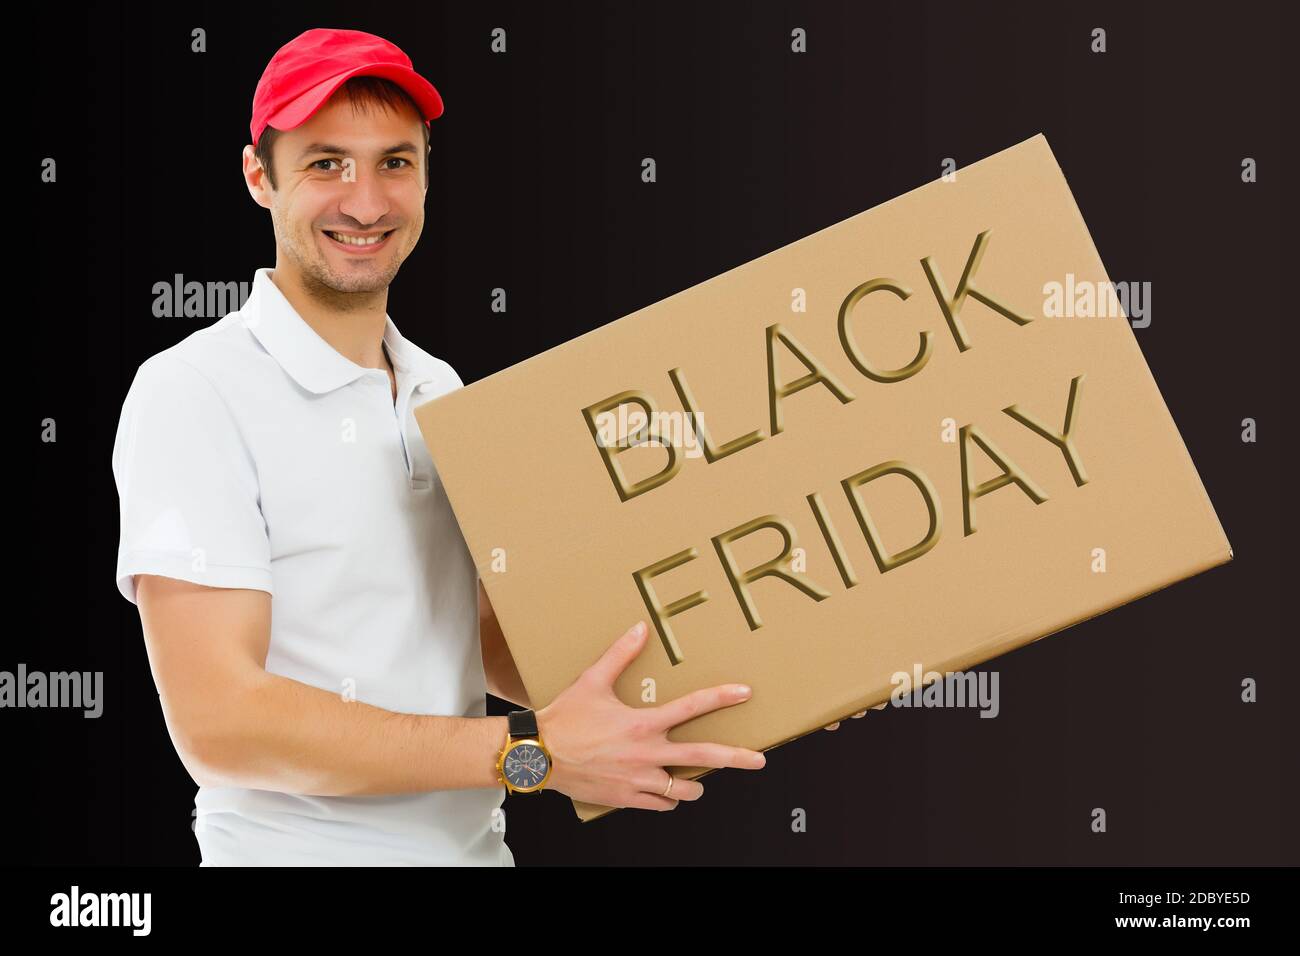 black friday and the delivery man. Delivery concept. Delivery service concept. Copy space. Black friday concept. Stock Photo